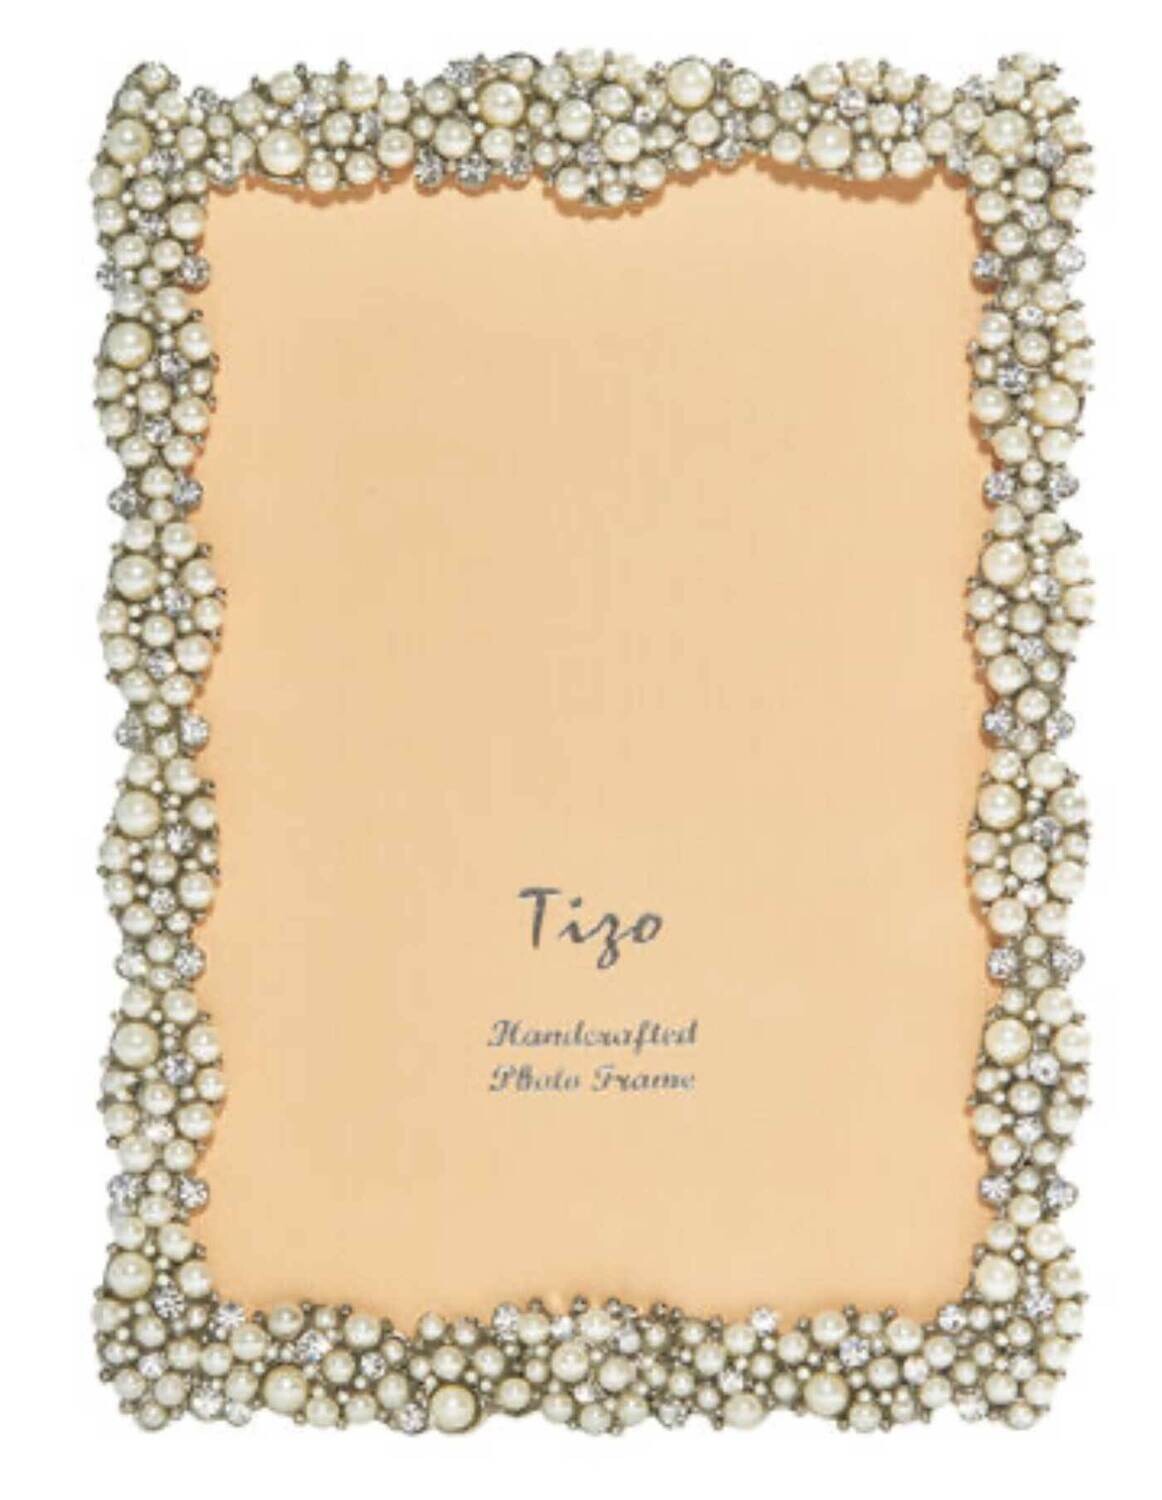 Tizo Pearls And Crystals Jeweltone Picture Frame 5 x 7 Inch RS63957